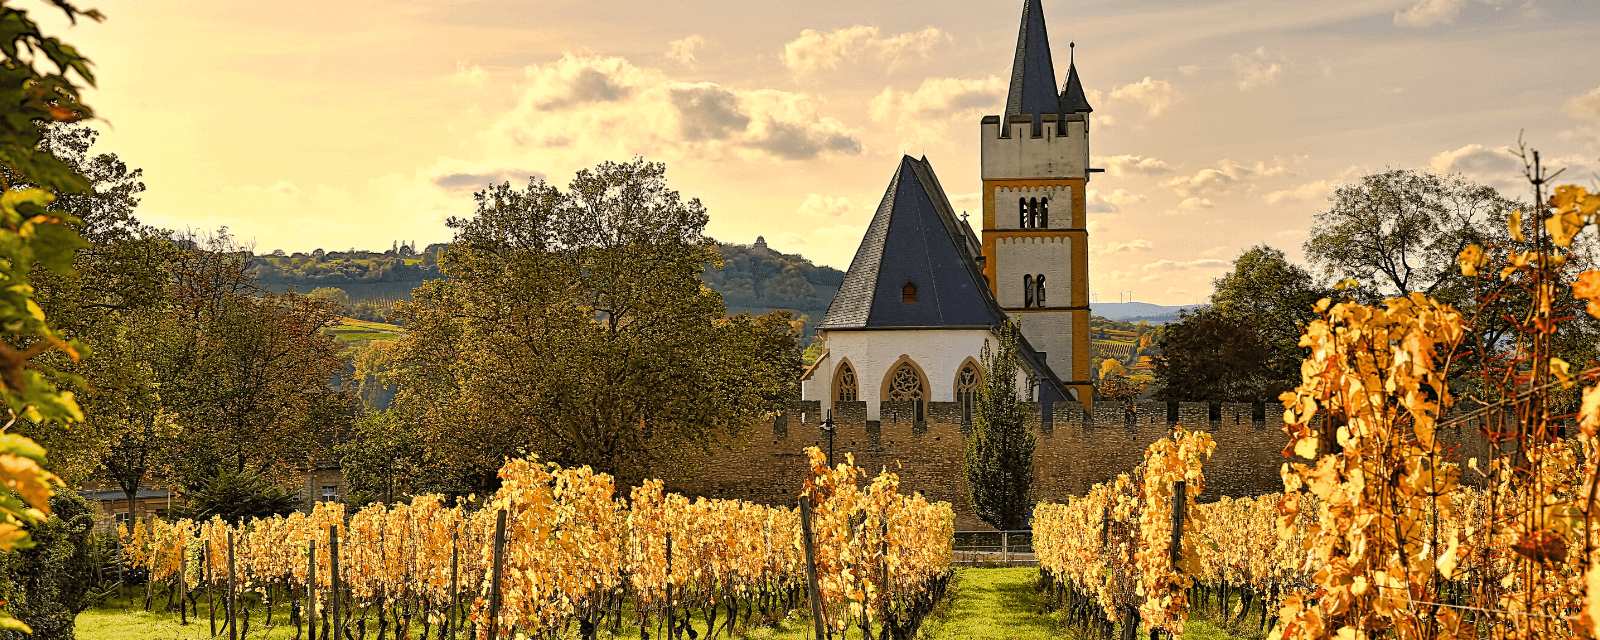 Vinyards with the citywall and the castle church